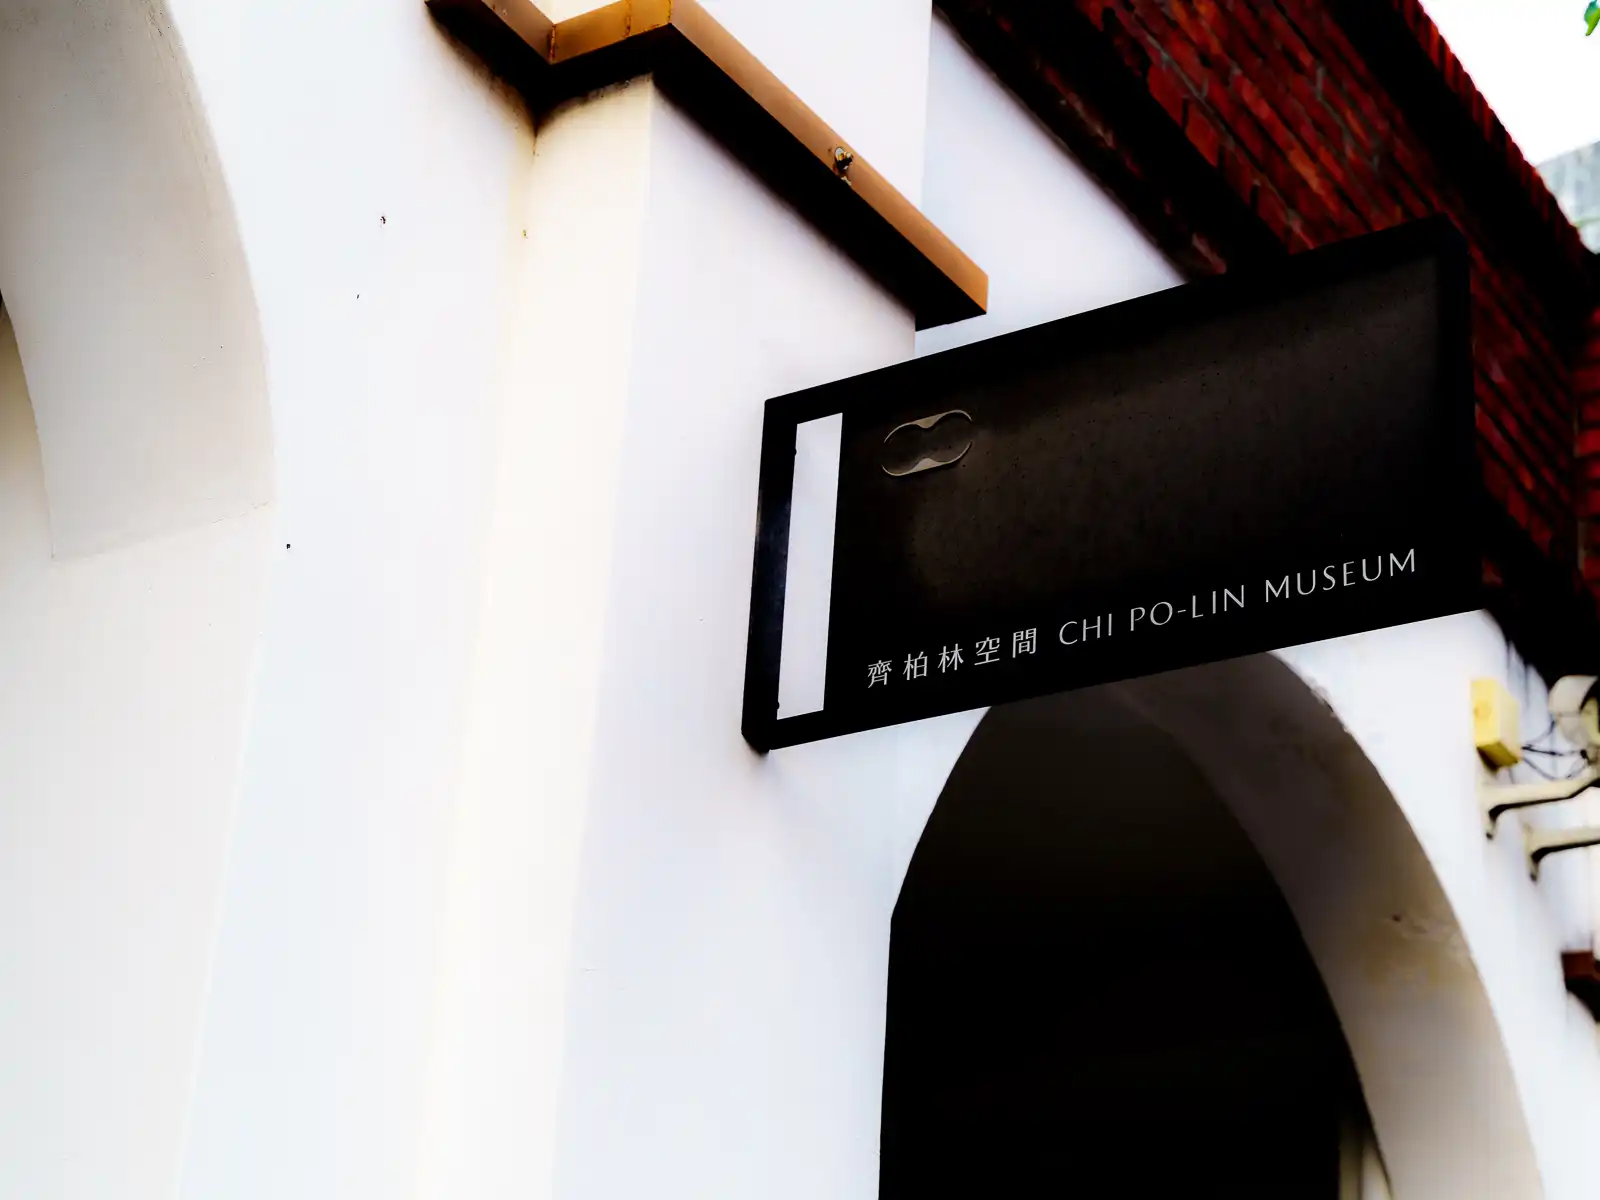 A minimal sign bearing the museum's name hangs above the entrance to the Chi Po-lin Museum.